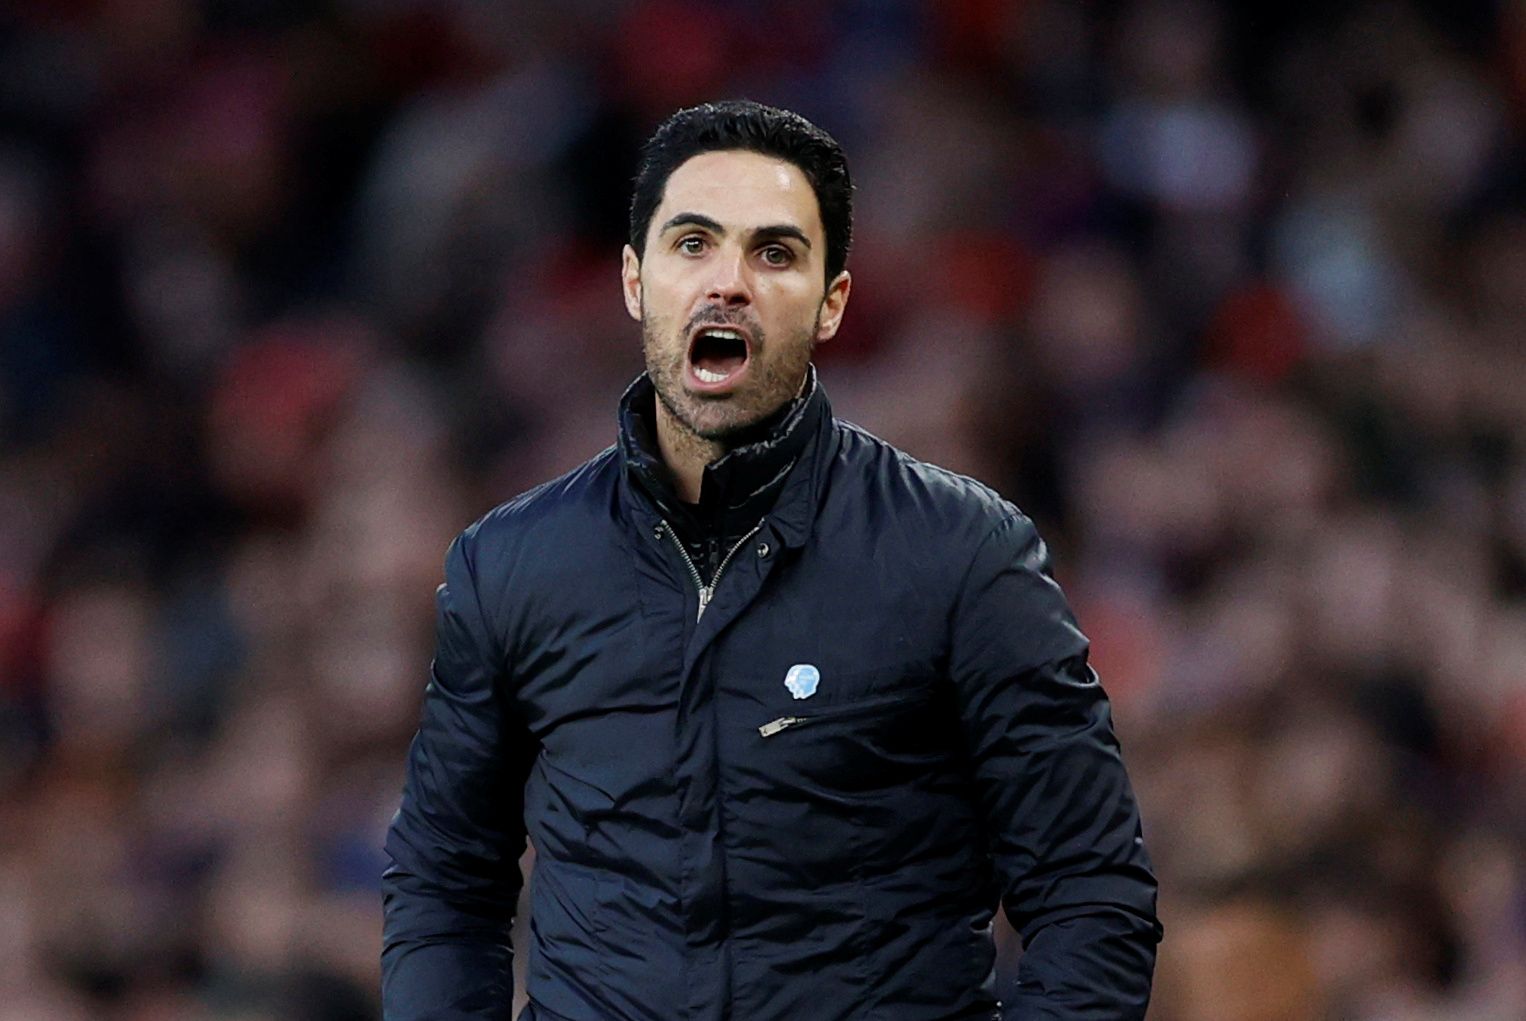 Soccer Football - Premier League - Arsenal v Newcastle United - Emirates Stadium, London, Britain - February 16, 2020   Arsenal manager Mikel Arteta reacts  Action Images via Reuters/John Sibley  EDITORIAL USE ONLY. No use with unauthorized audio, video, data, fixture lists, club/league logos or 